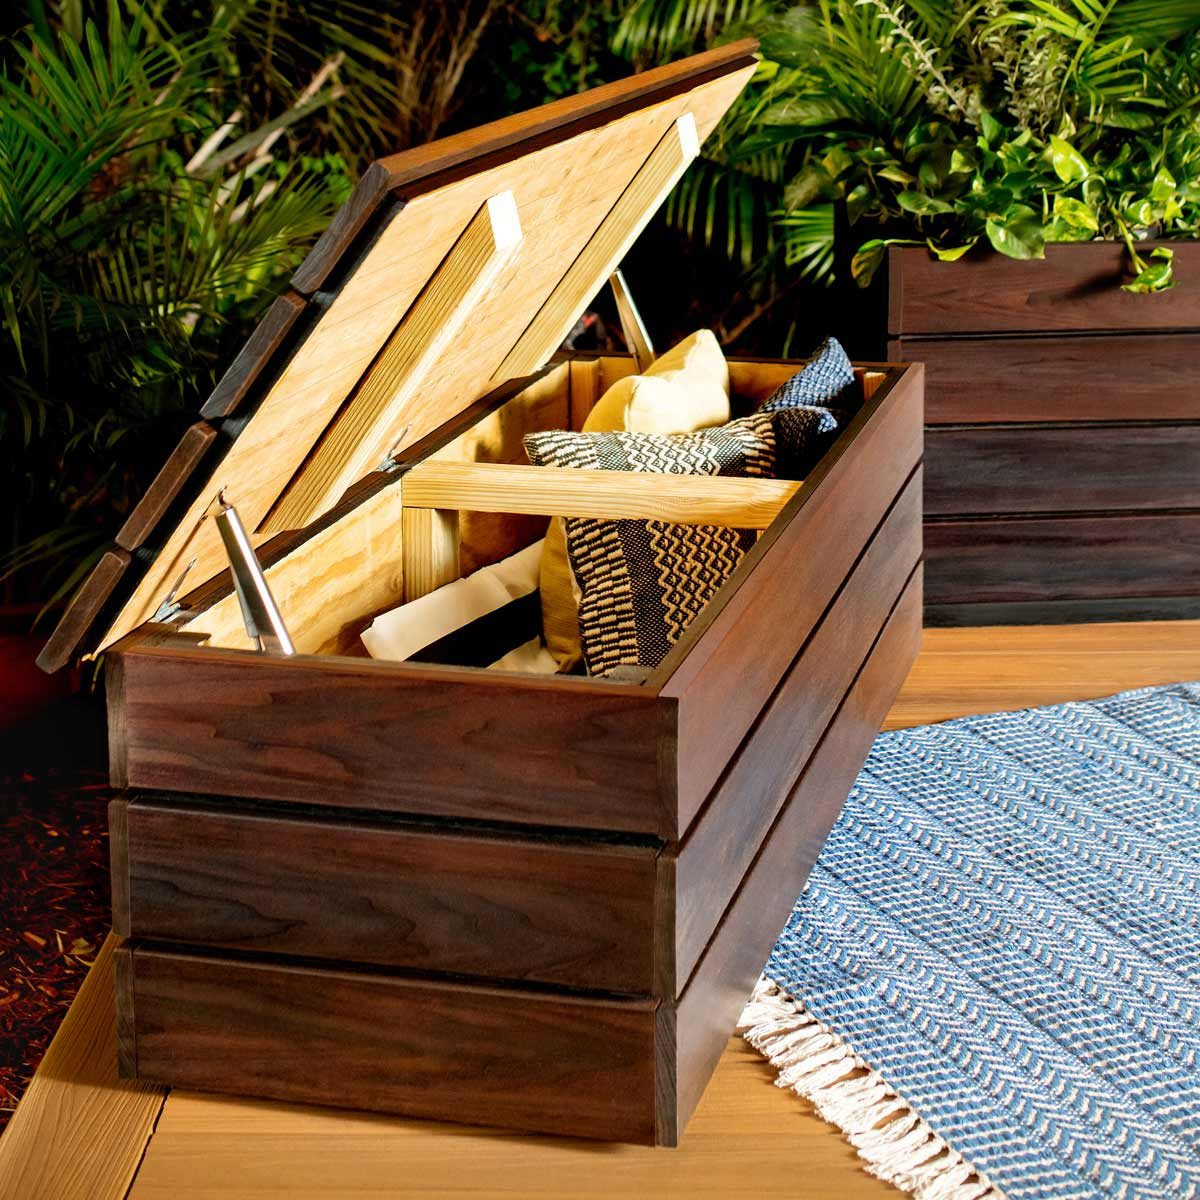 Bench Storage Seat
 How to Build an Outdoor Storage Bench